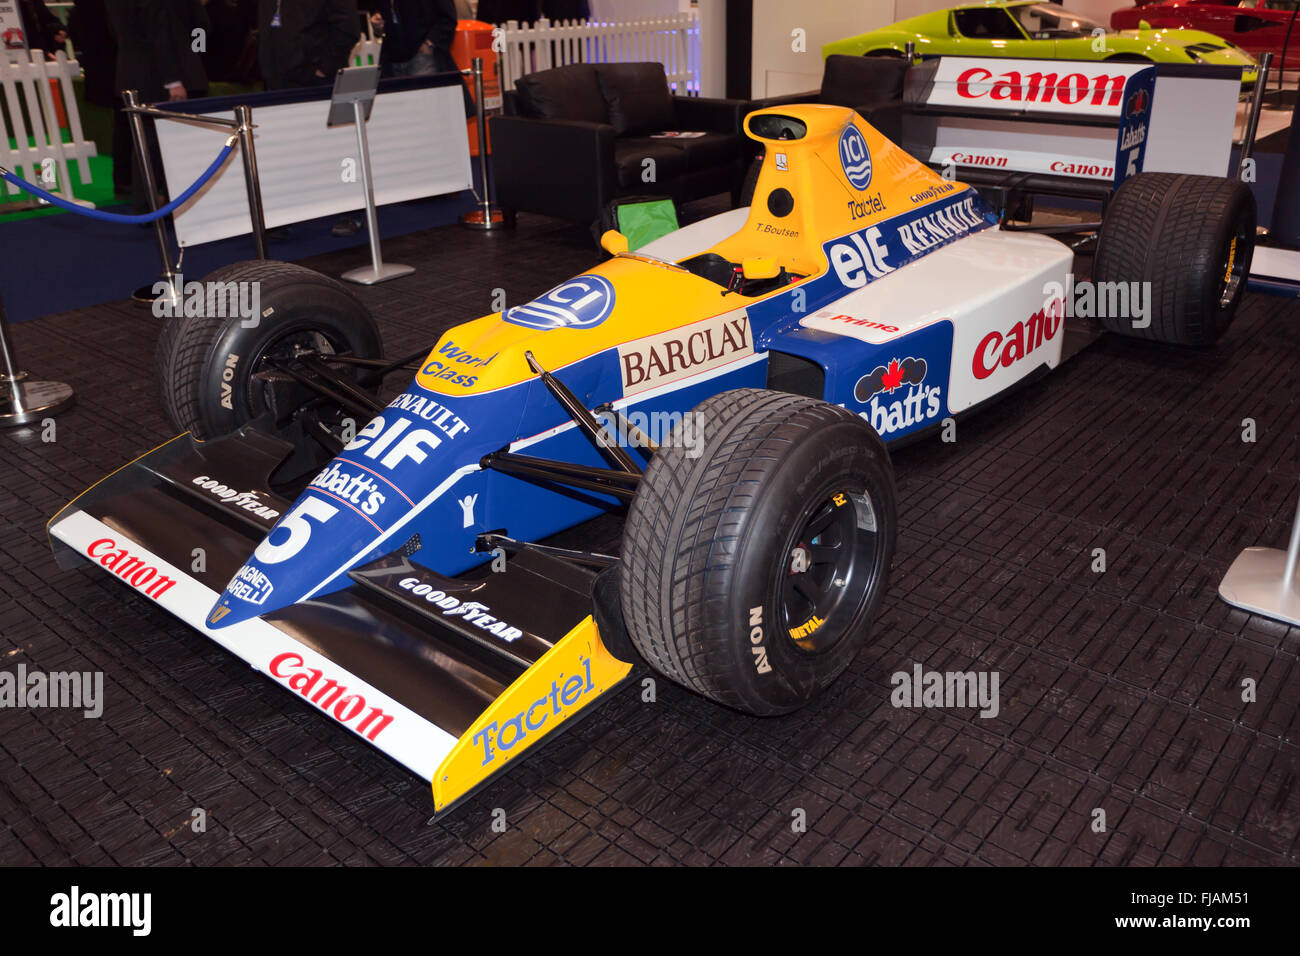 Thierry Boutse's  Williams FW13B-08 Formula One race car from the 1990 season, on static display at the London Classic Car Show 2016 Stock Photo